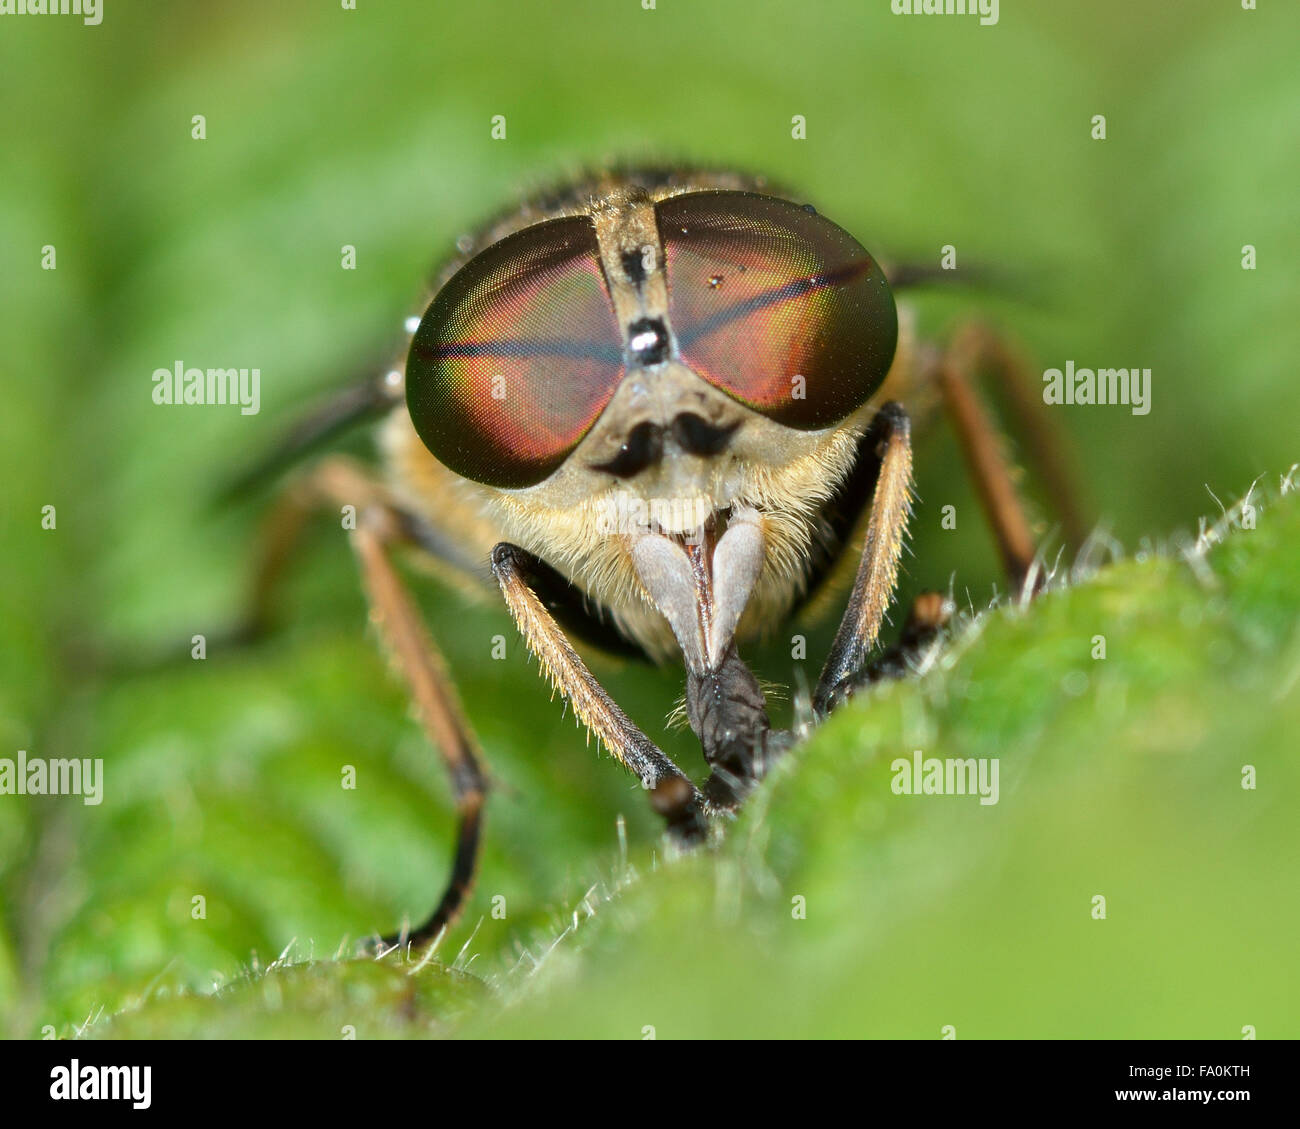 Band-eyed brown horsefly (Tabanas bromius) head-on. A biting fly shown with detail in compound eyes and large jaws Stock Photo